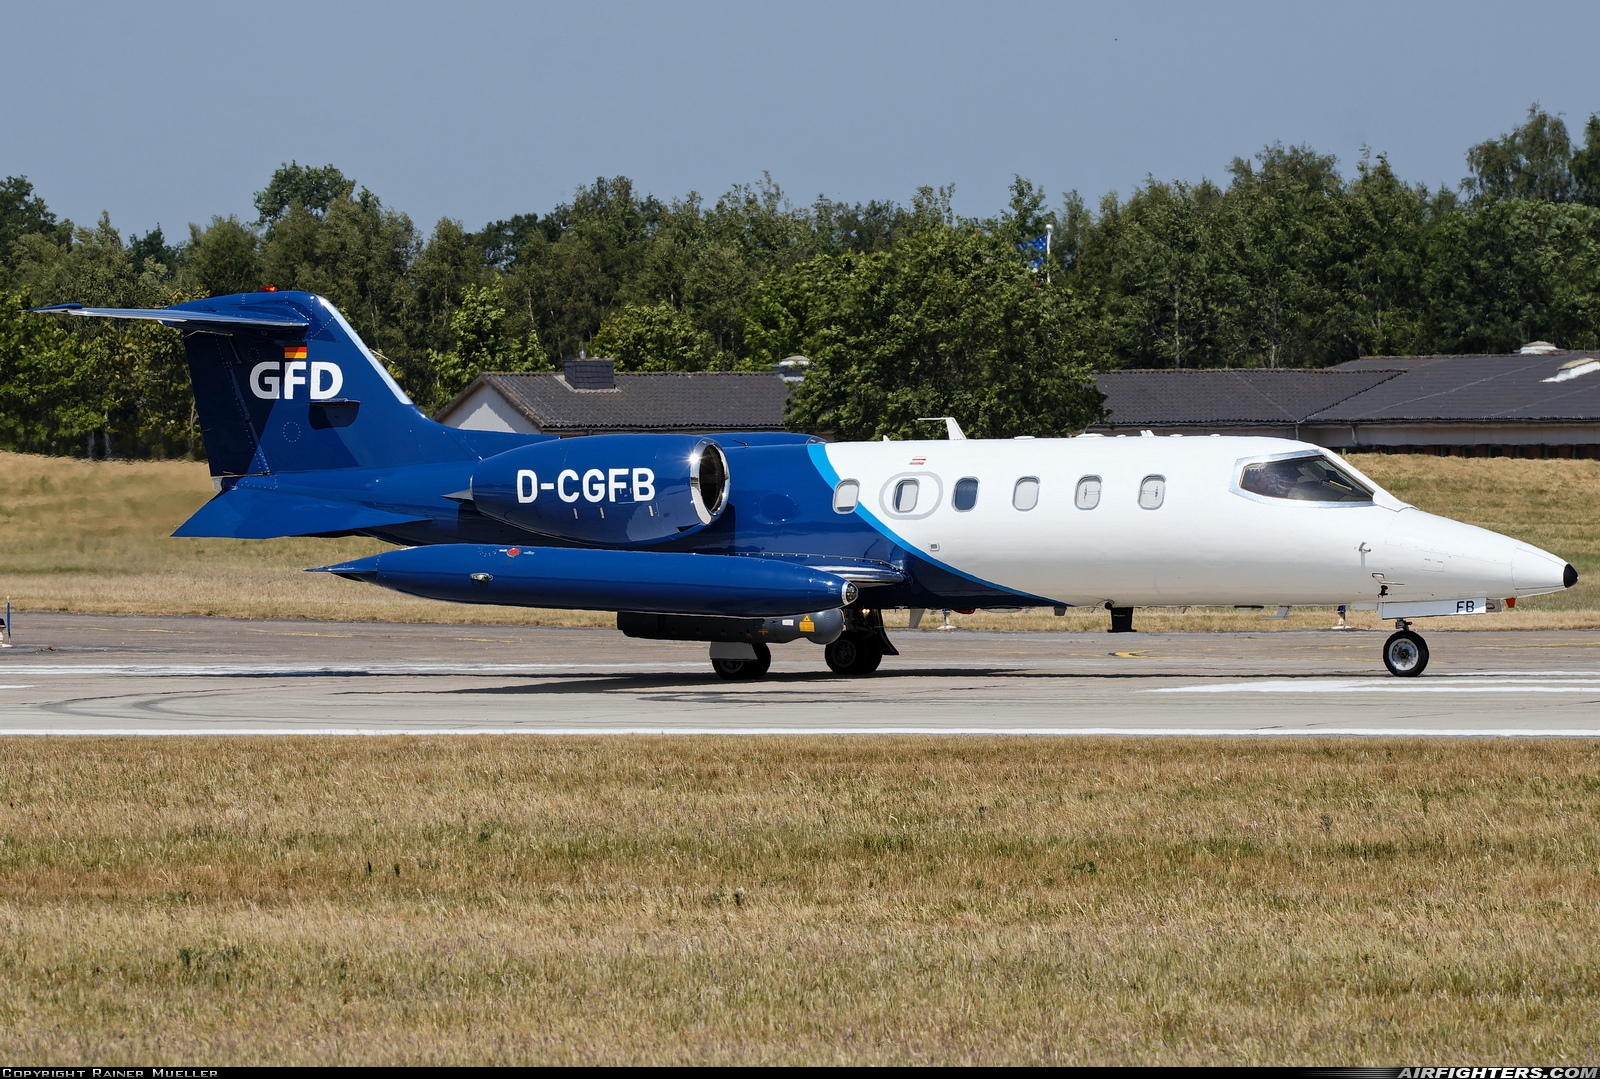 Company Owned - GFD Learjet 35A D-CGFB at Hohn (ETNH), Germany